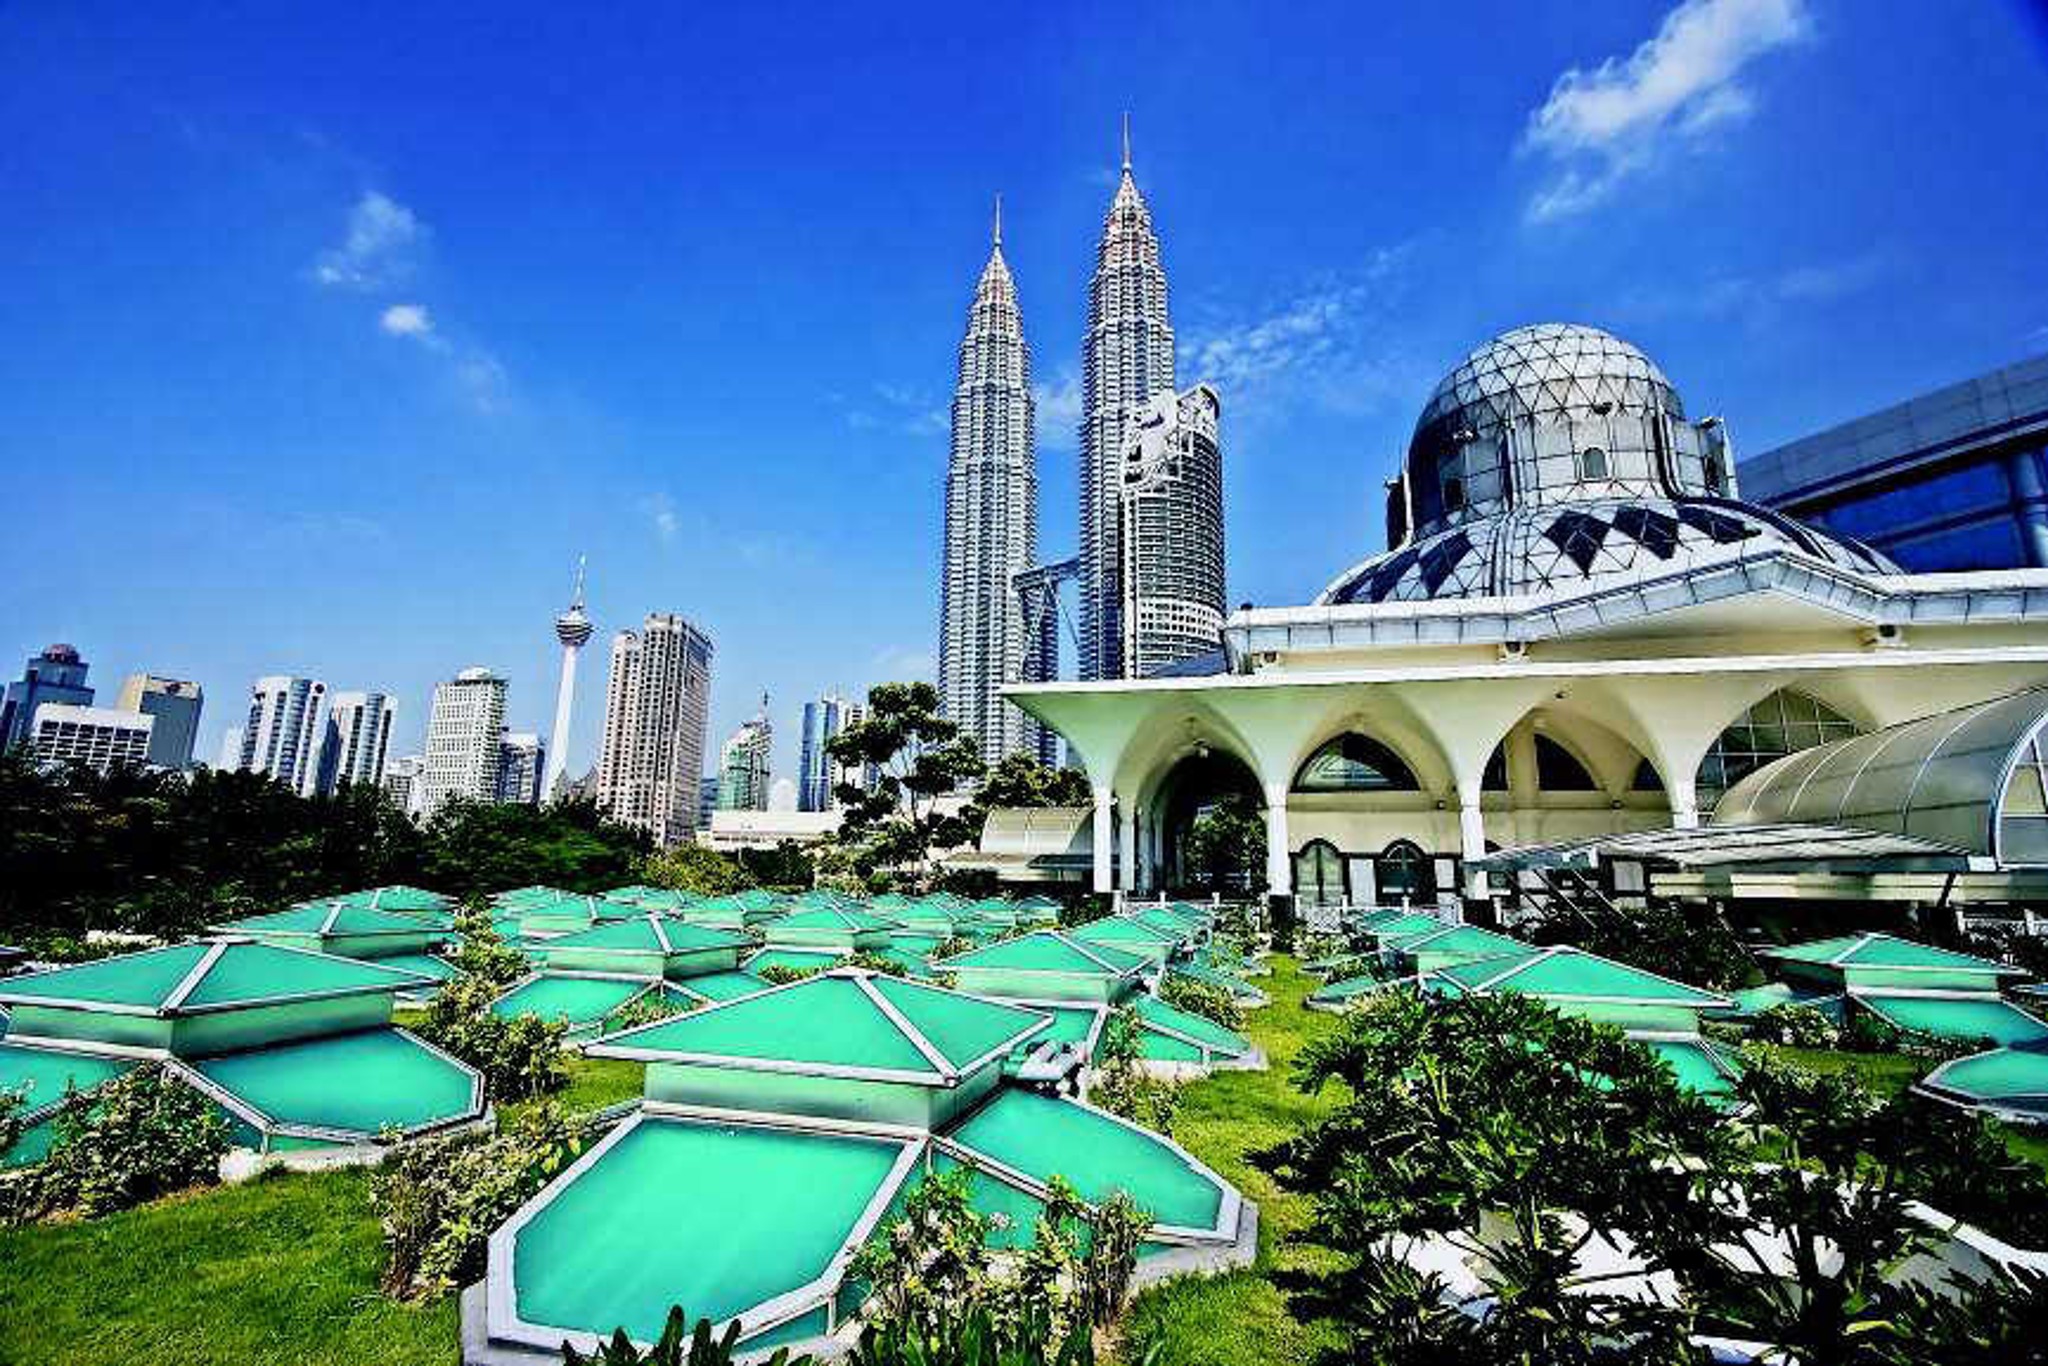 travel to malaysia from qatar